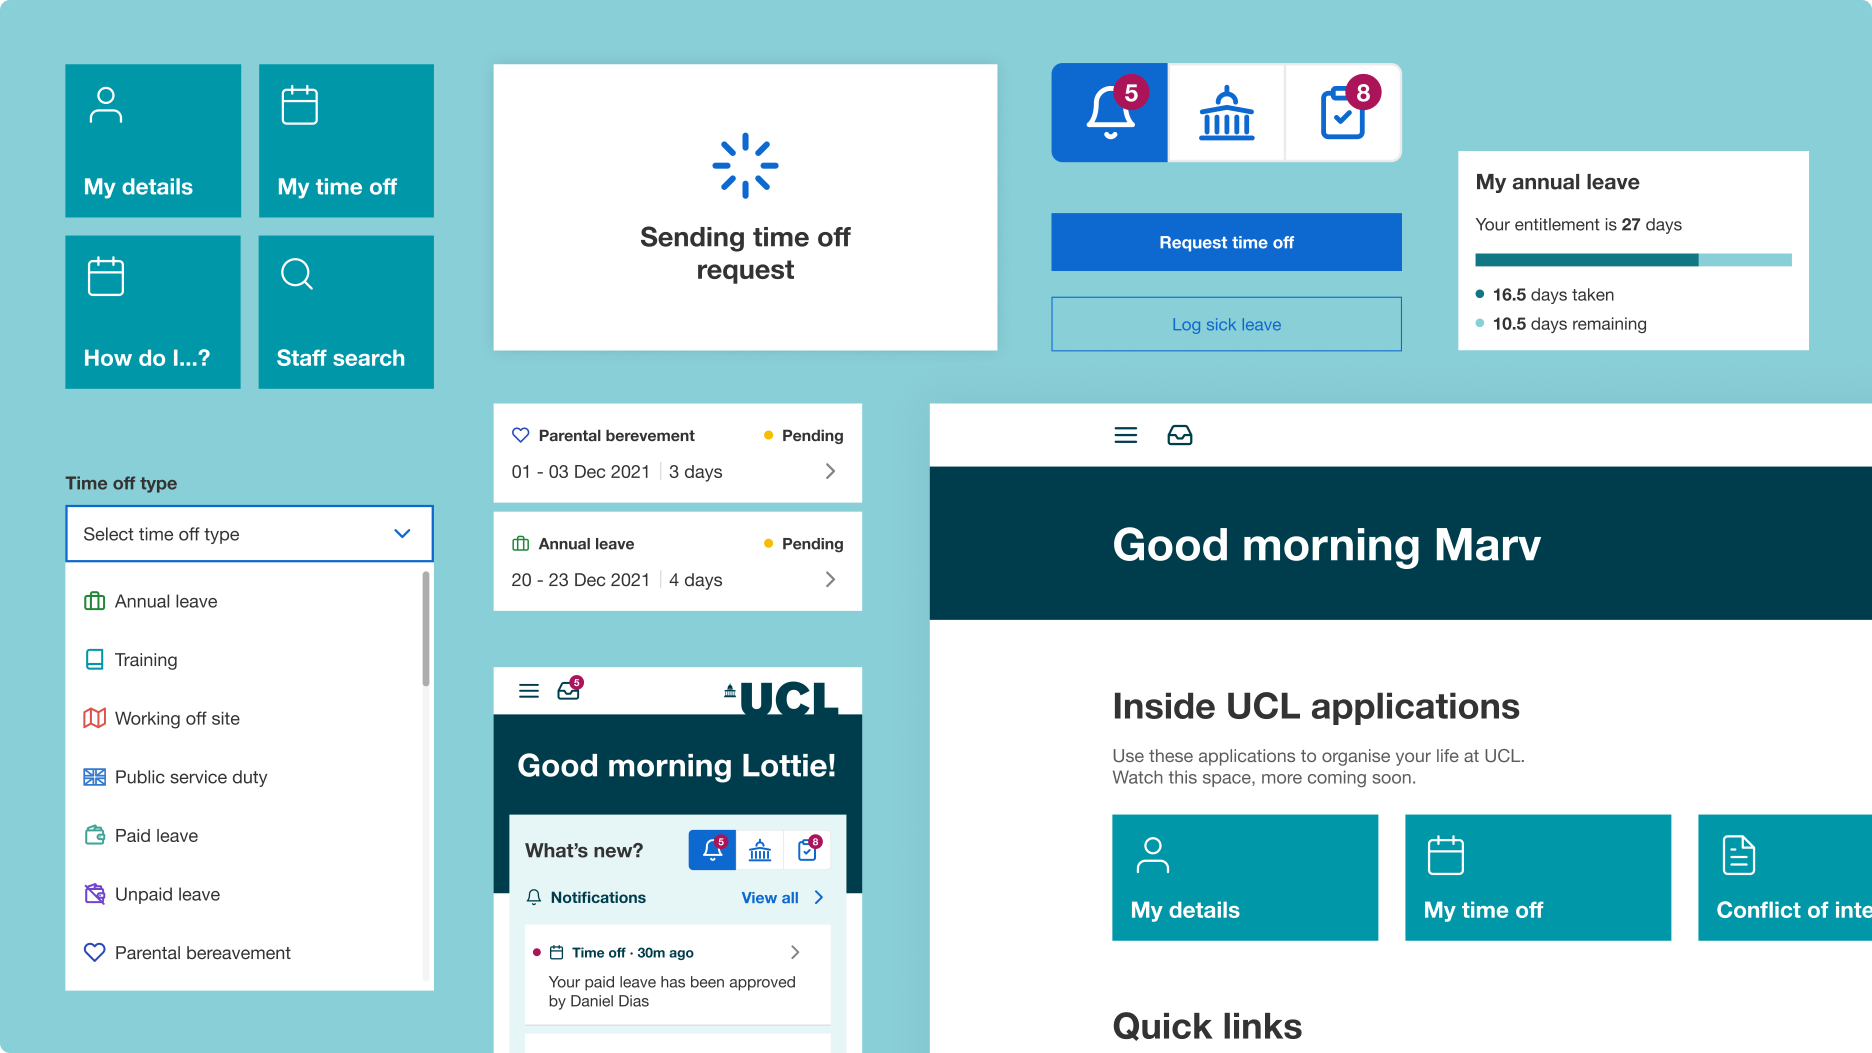 Collection of illustrations and visuals from UCL employee experience platform